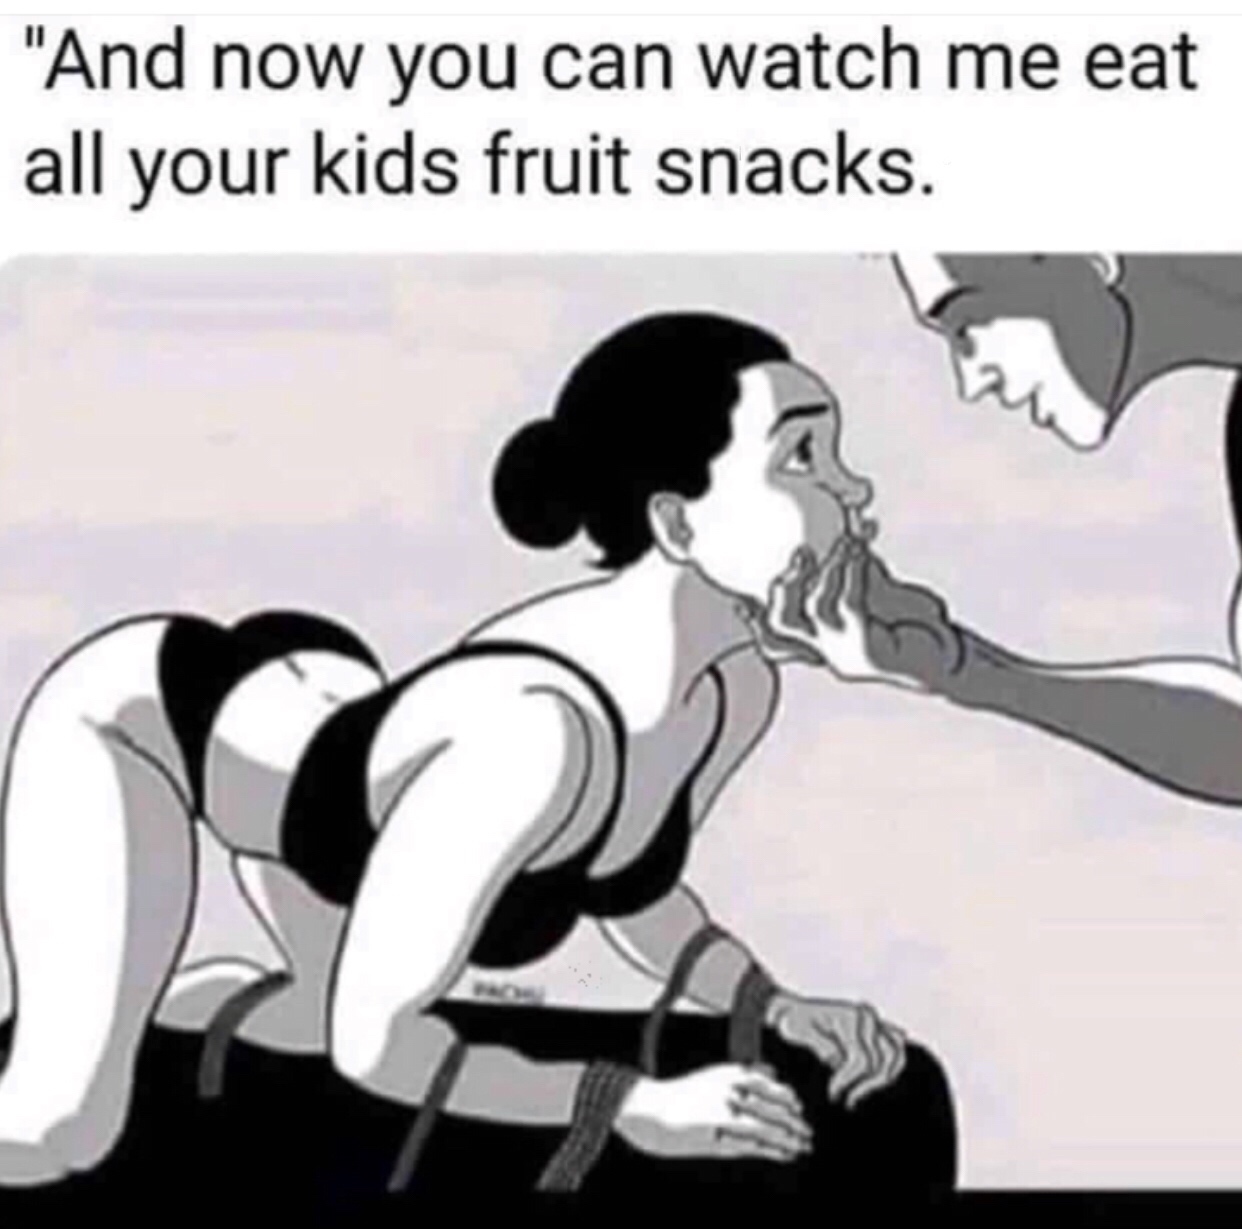 now you can watch me eat all your kids fruit snacks - "And now you can watch me eat all your kids fruit snacks.